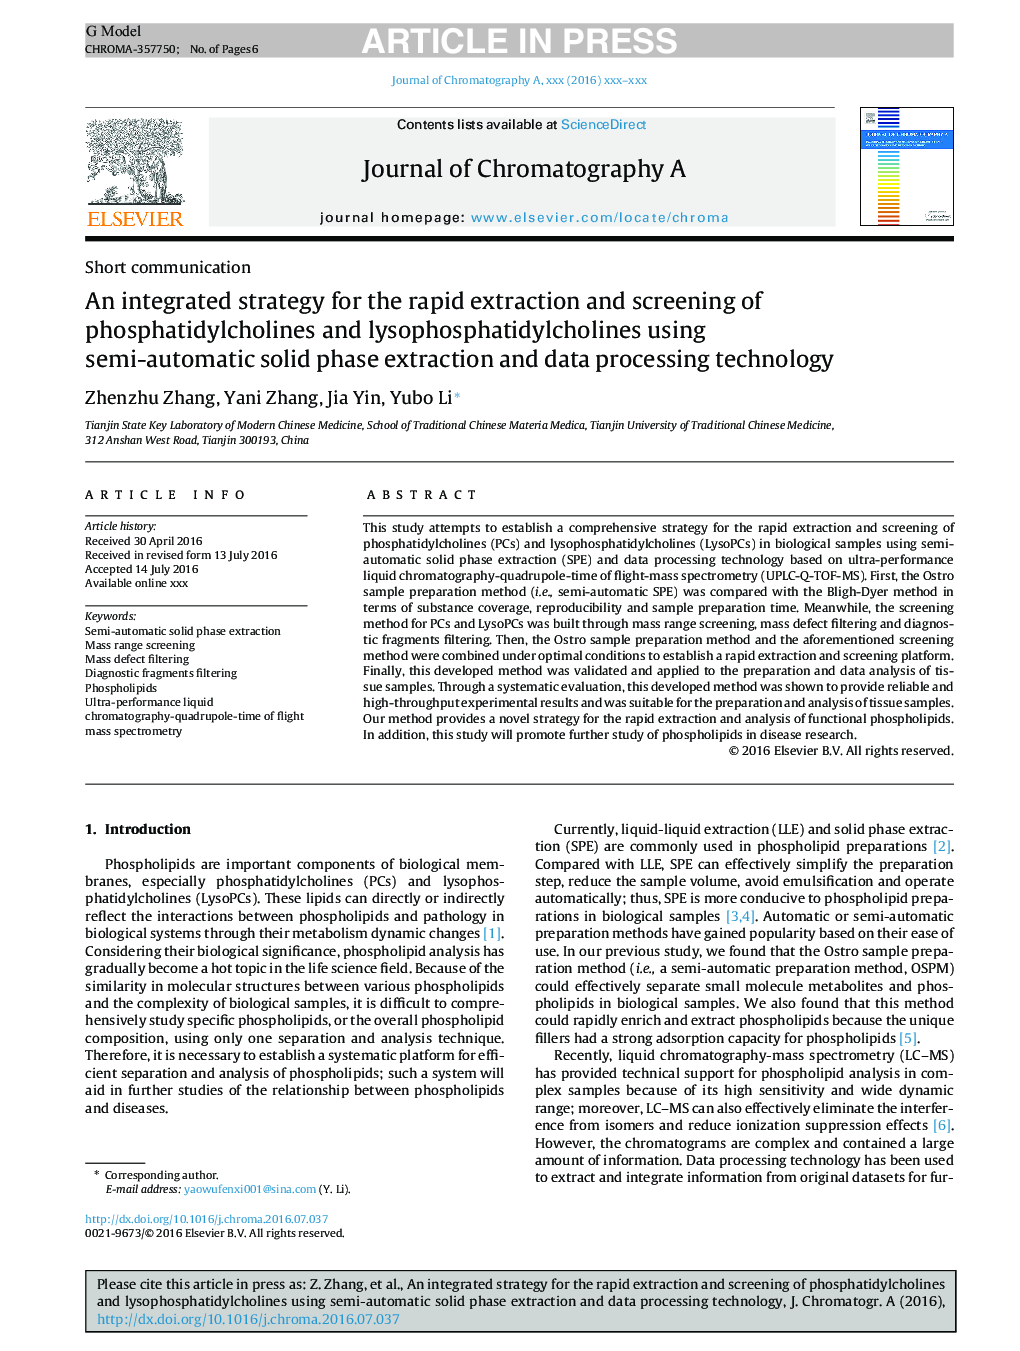 An integrated strategy for the rapid extraction and screening of phosphatidylcholines and lysophosphatidylcholines using semi-automatic solid phase extraction and data processing technology